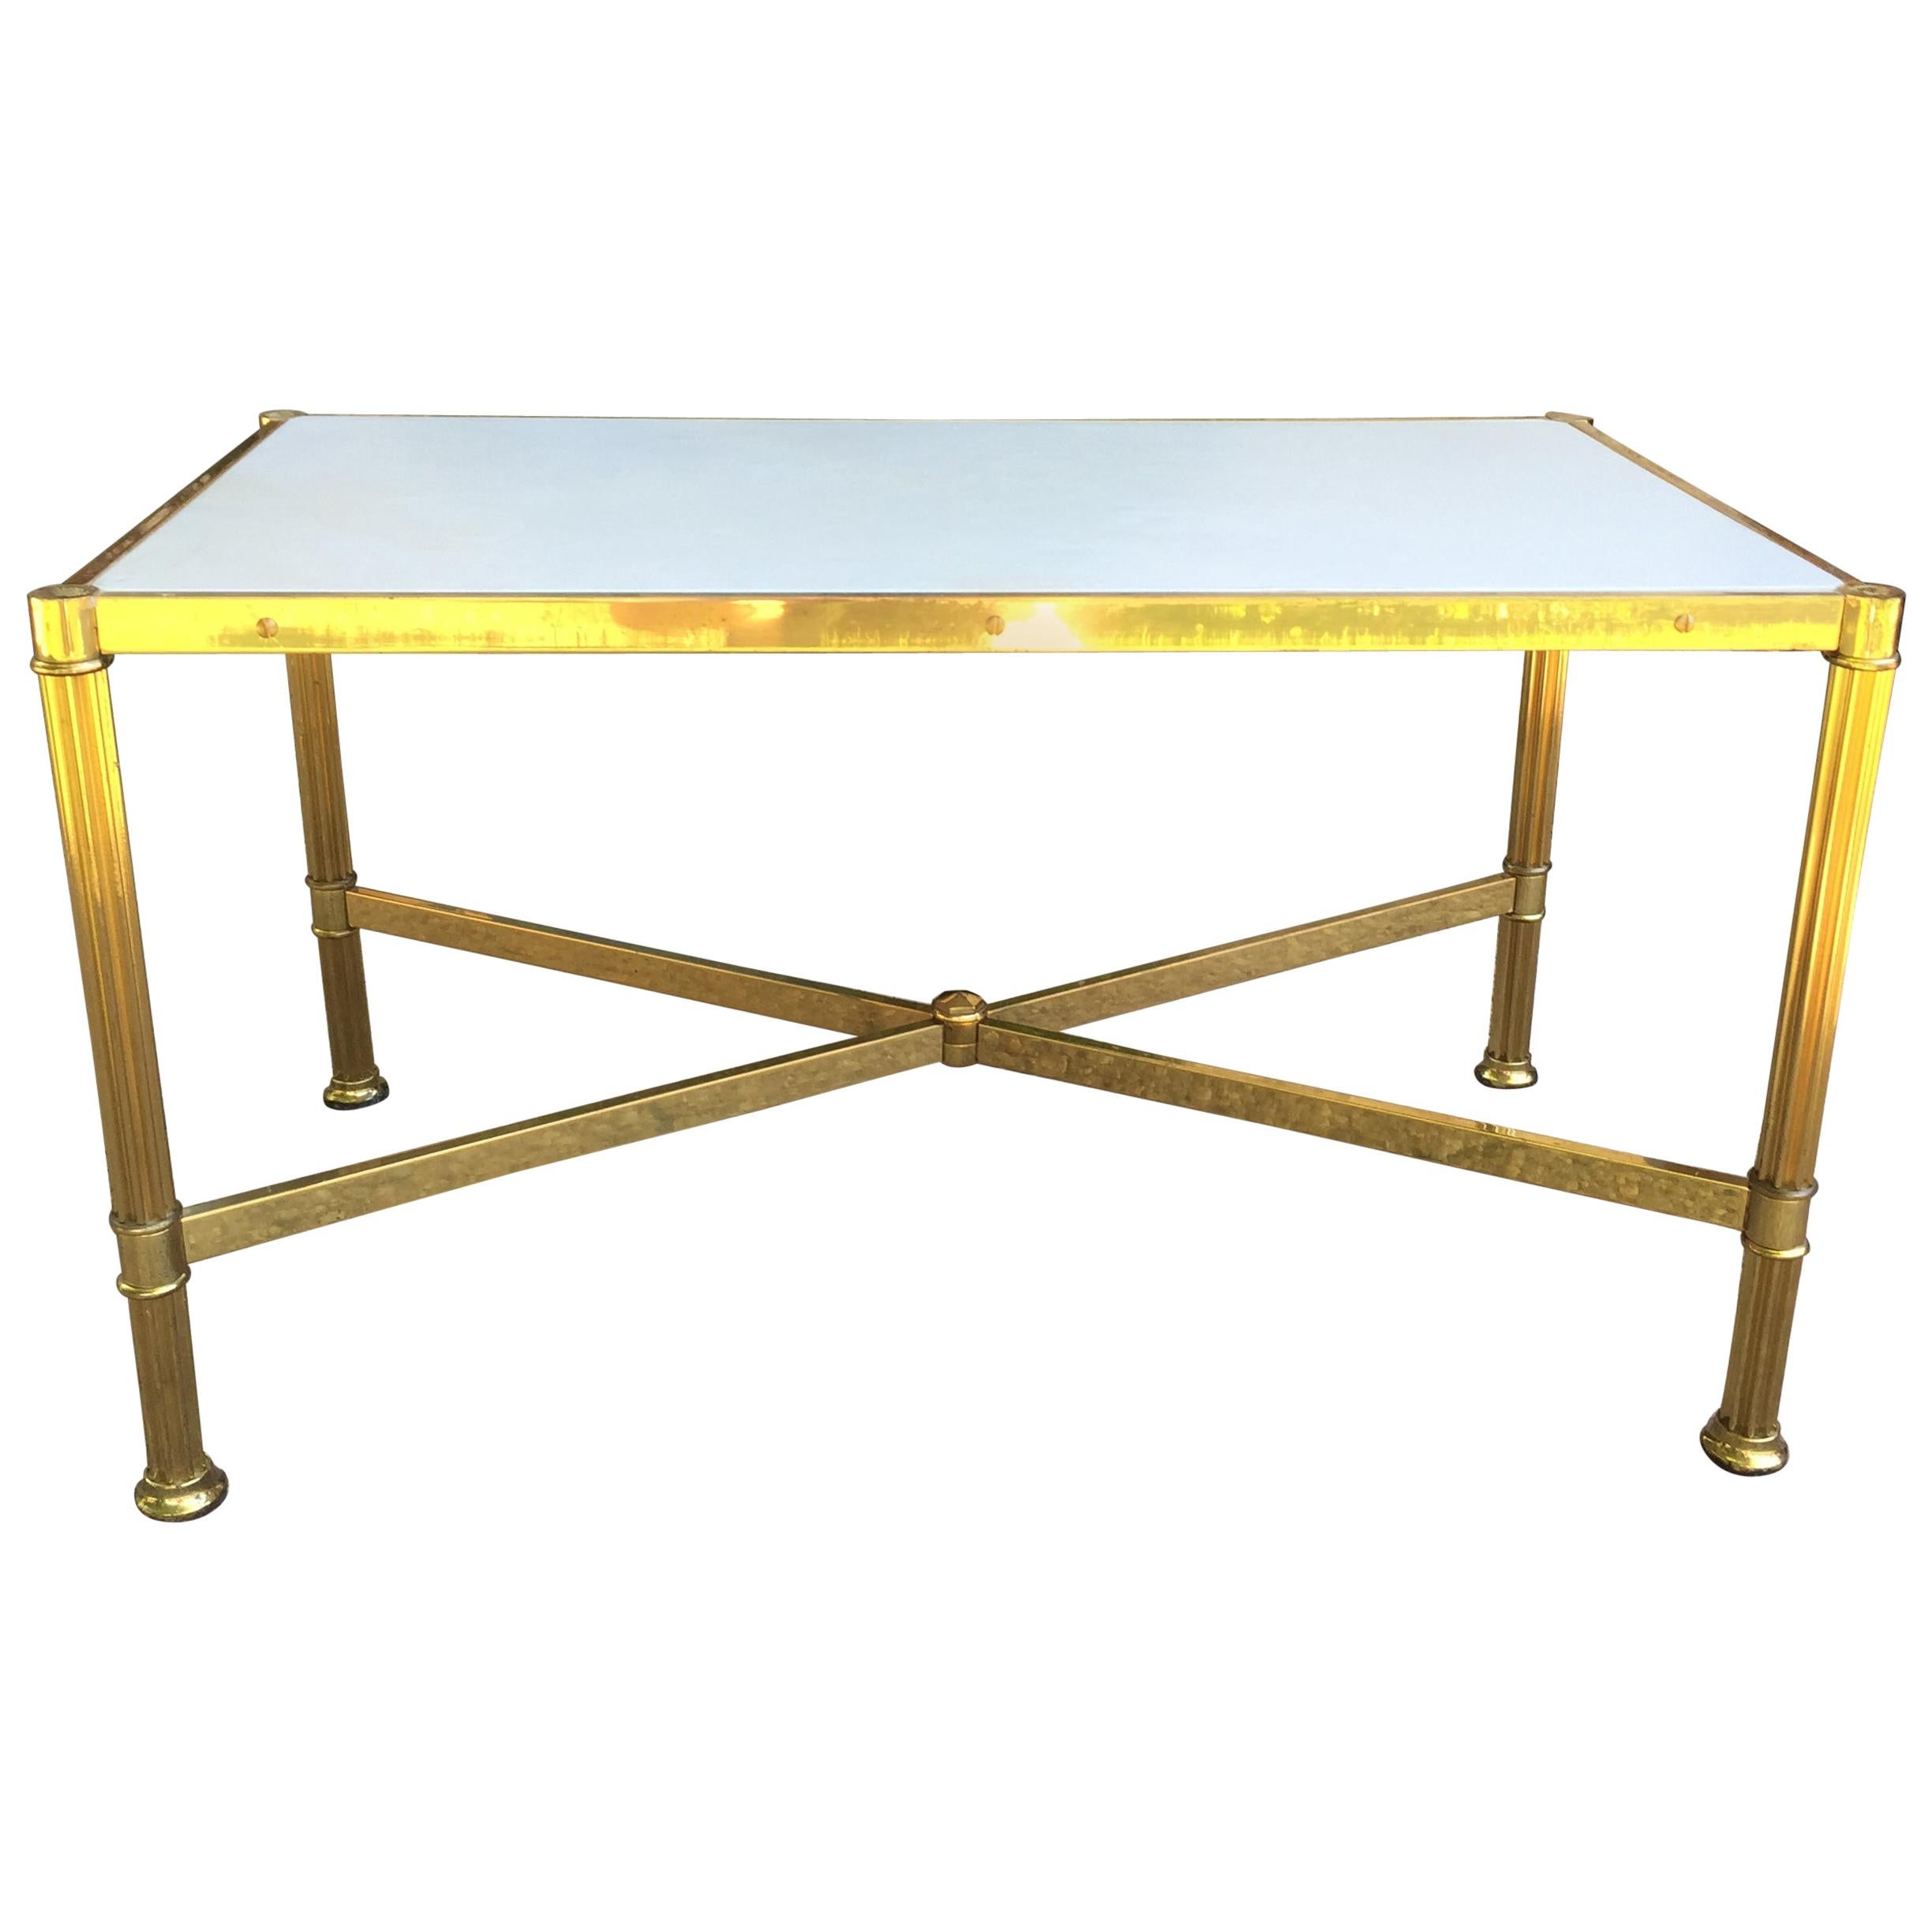 Italian 1960s Rectangular Side Table in Parchment and Brass, Attr. Maison Jansen For Sale